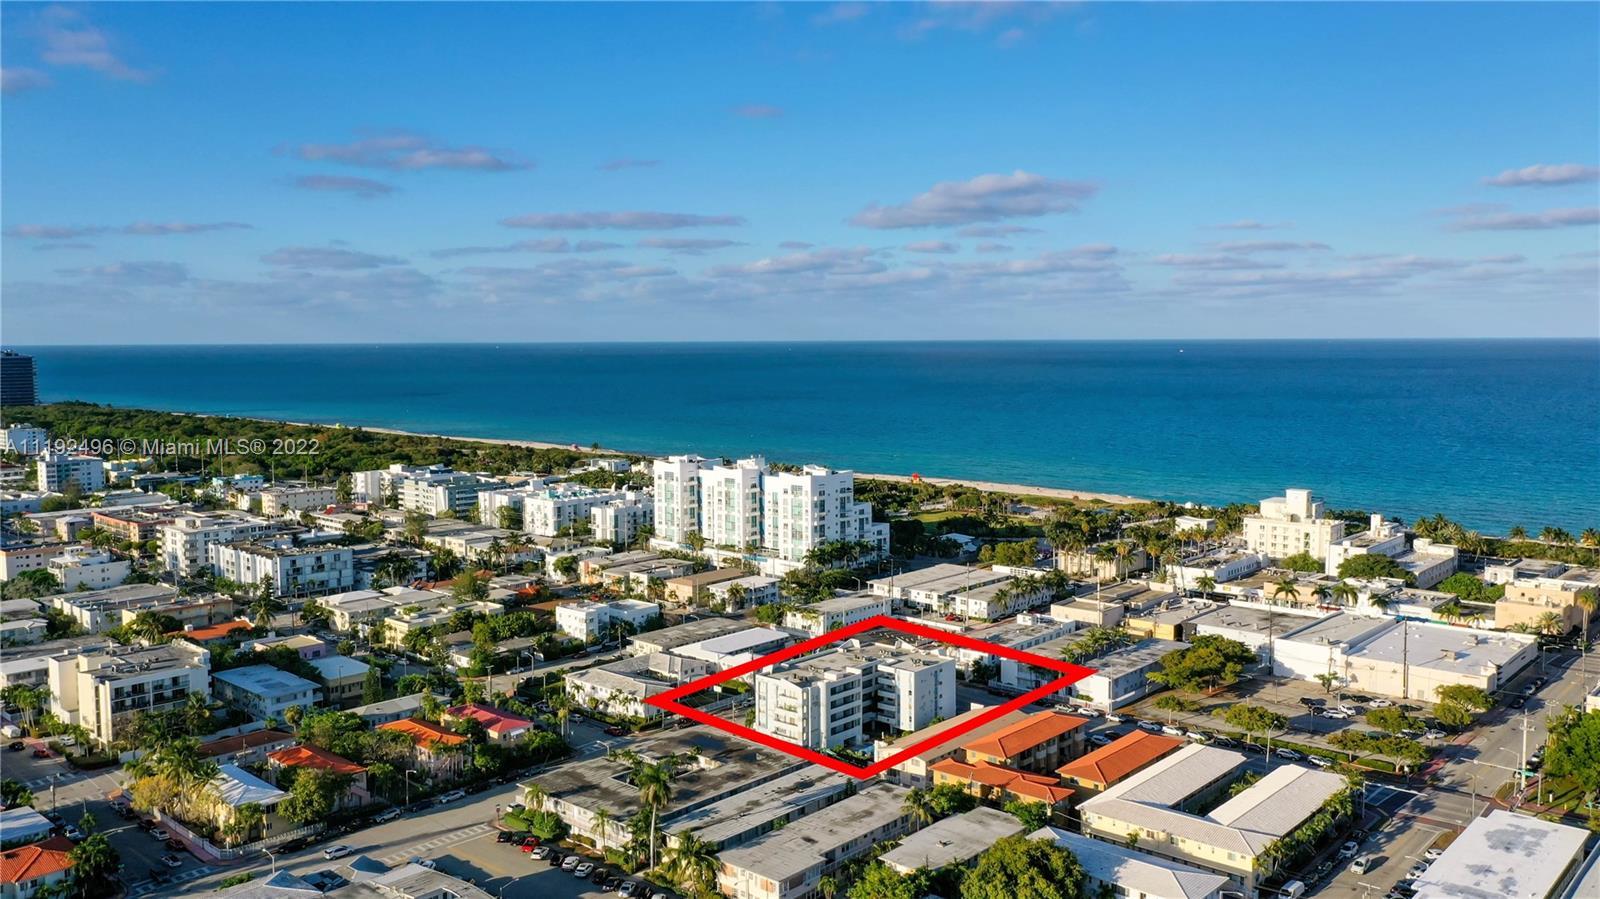 Live across from the beach in this rare-to-find large 1 bed 1 1/2 bath condo in a boutique-style wel